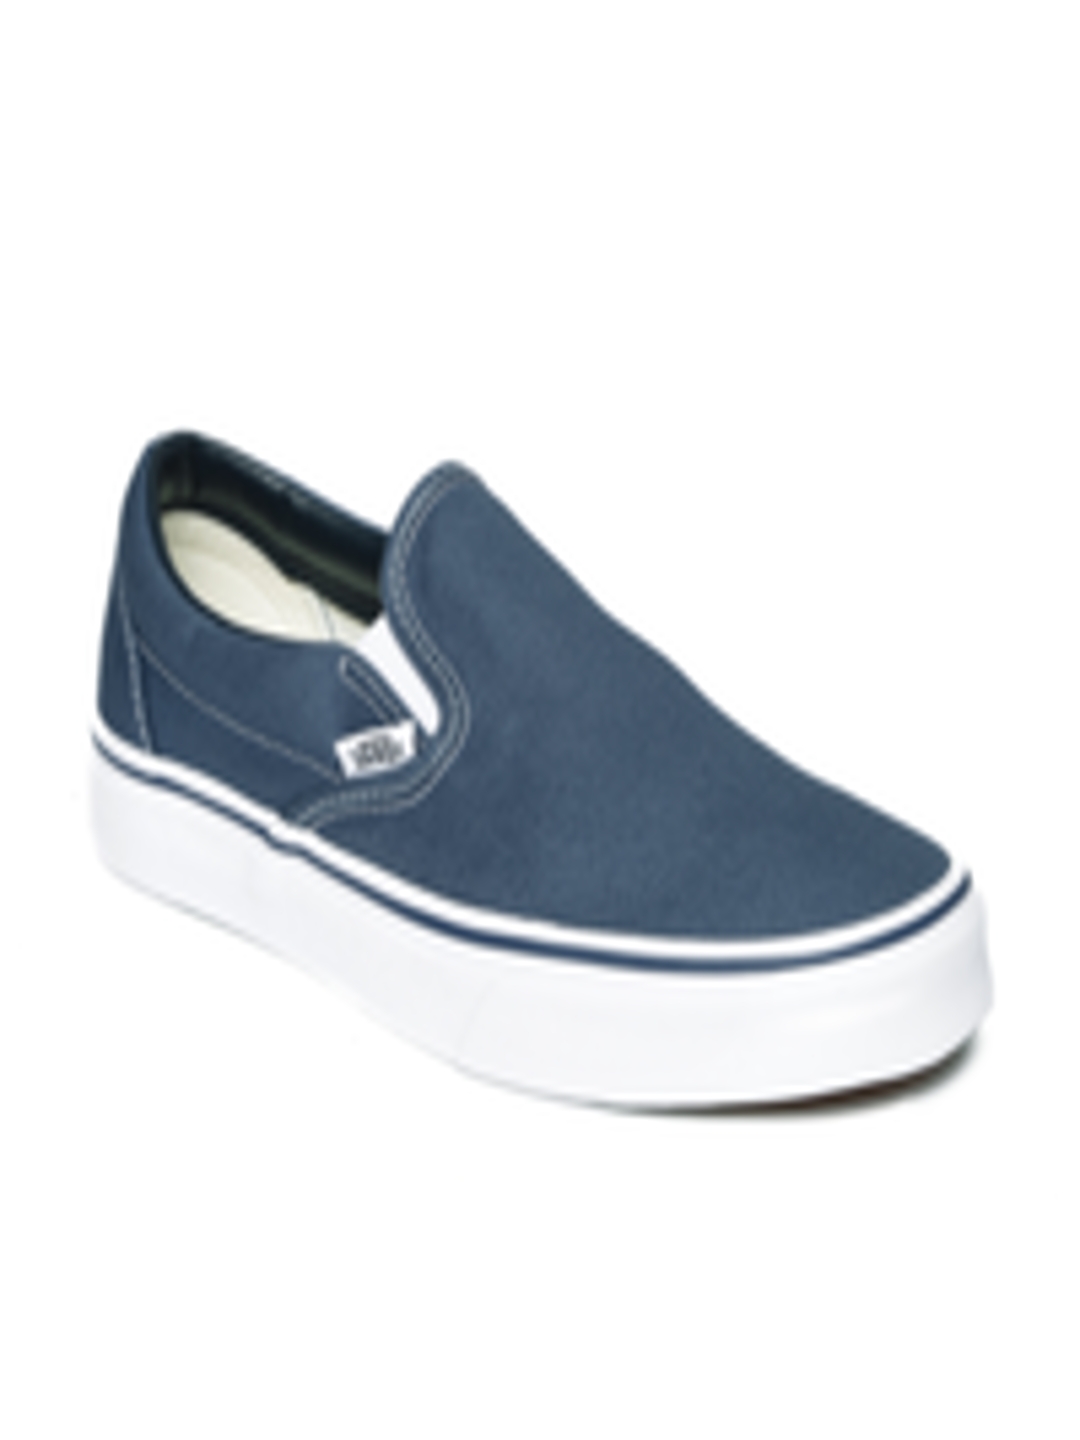 Buy Vans Unisex Navy Classic Slip On Sneakers - Casual Shoes for Unisex ...